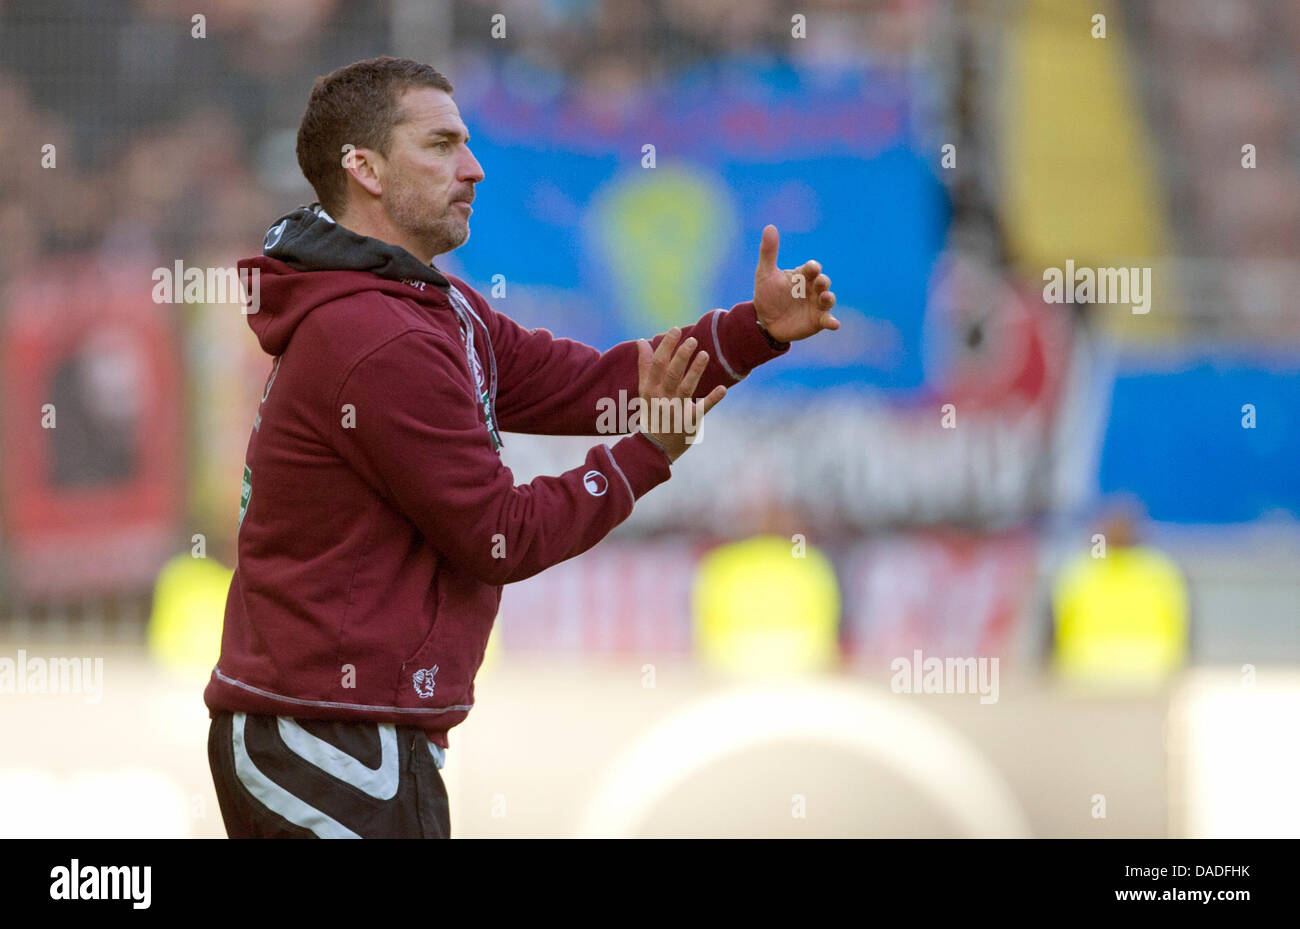 Kaiserslautern's head coach Marco Kurz gestures from the sidelines during the German Bundesliga match between FC Kaiserslautern and SC Freiburg at the Fritz-Walter-Stadium in Kaiserslautern, Germany, 22 October 2011. Photo: UWE ANSPACH  (ATTENTION: EMBARGO CONDITIONS! The DFL permits the further utilisation of the pictures in IPTV, mobile services and other new technologies only no Stock Photo